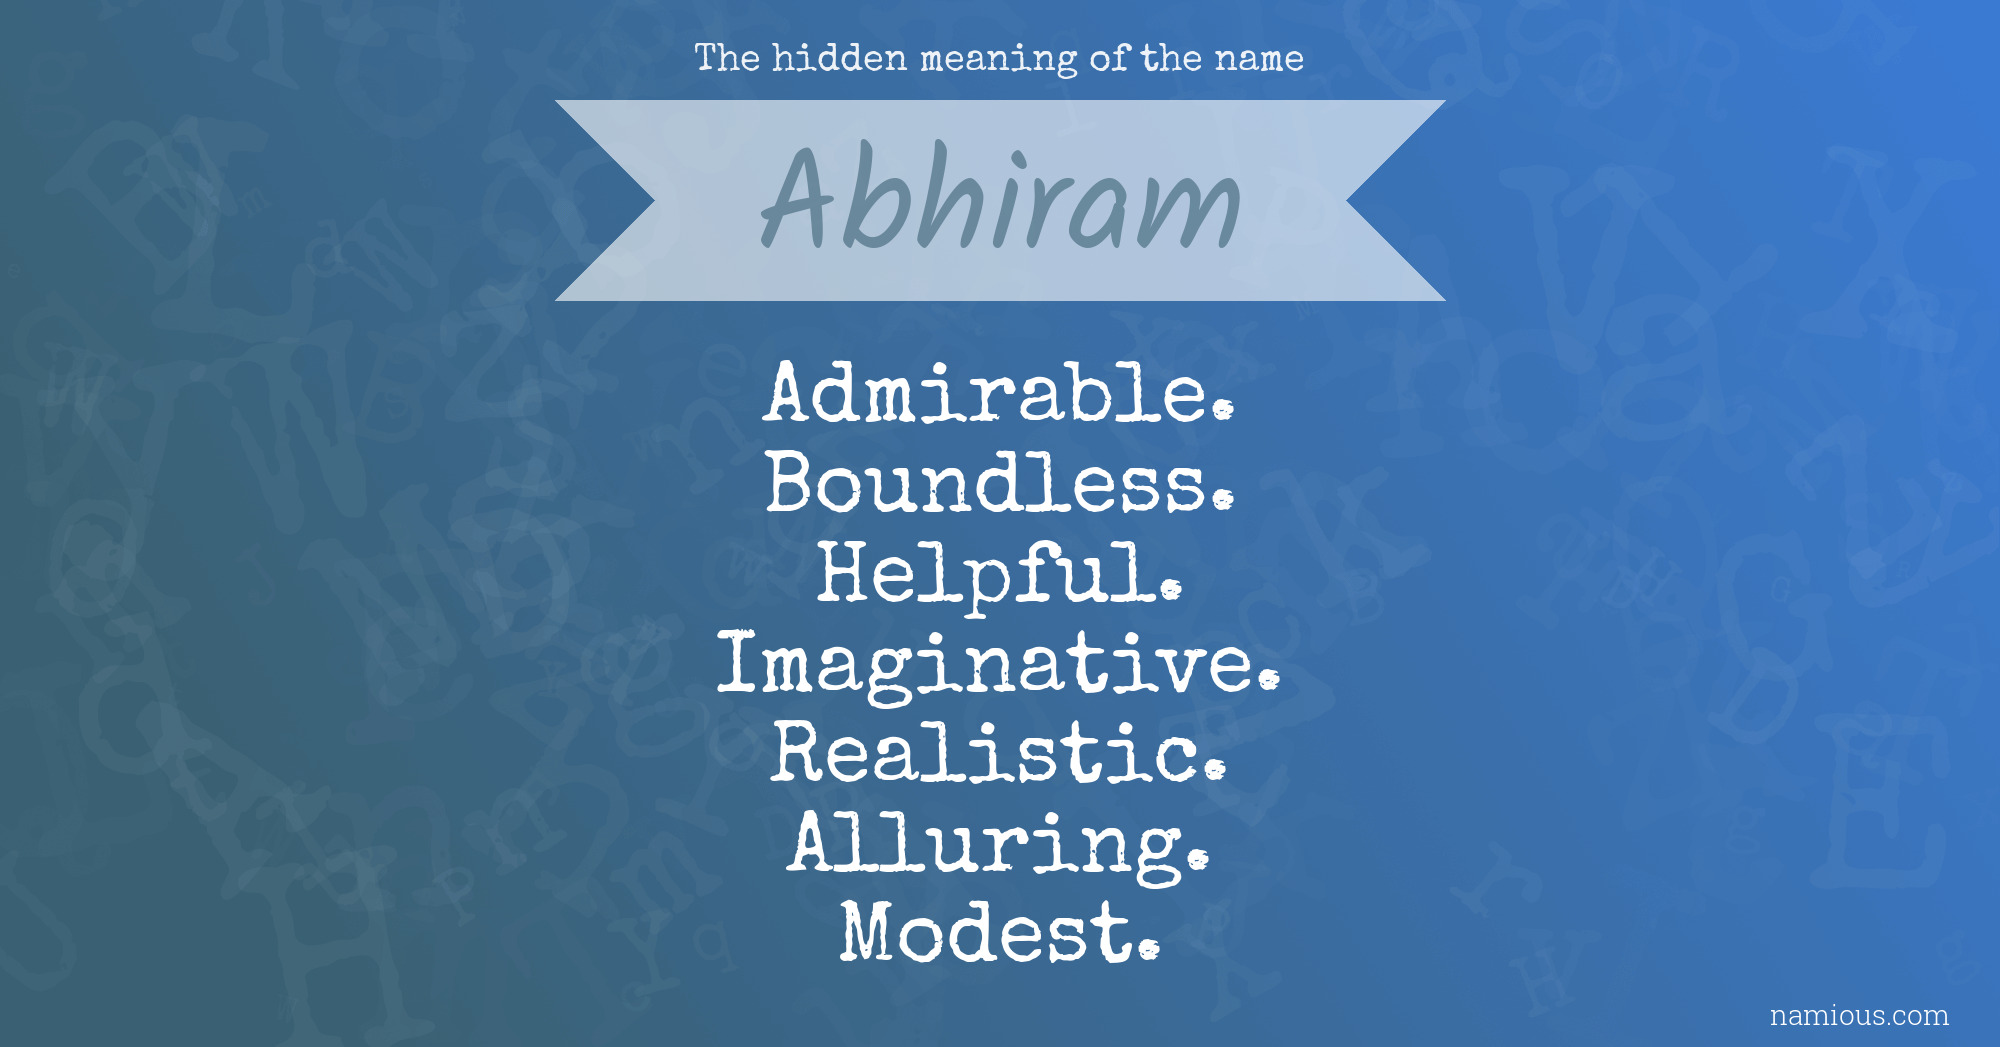 The hidden meaning of the name Abhiram